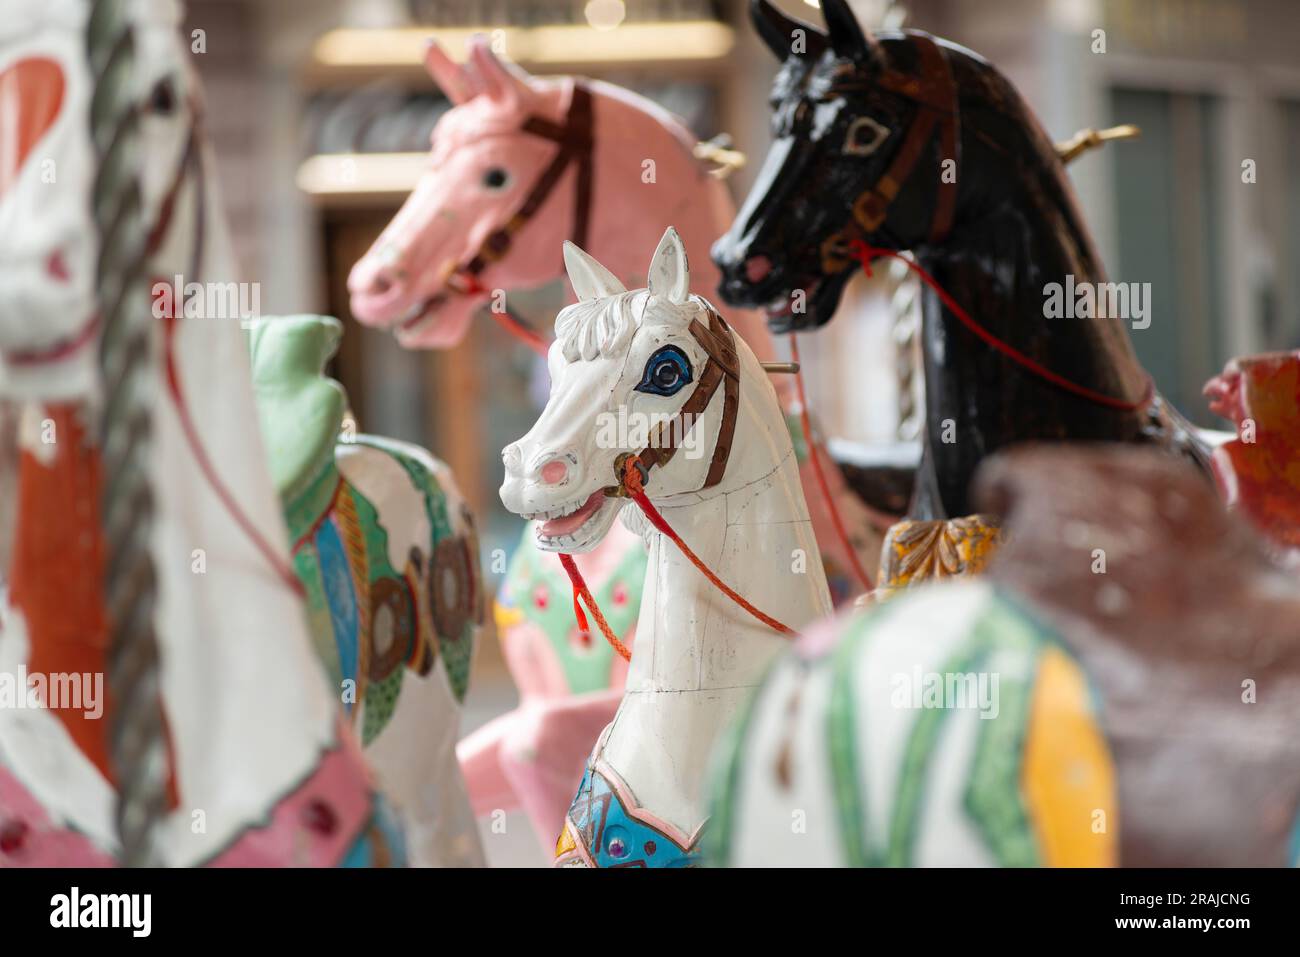 Italy, Lombardy, Vintage Carousel Horse Stock Photo